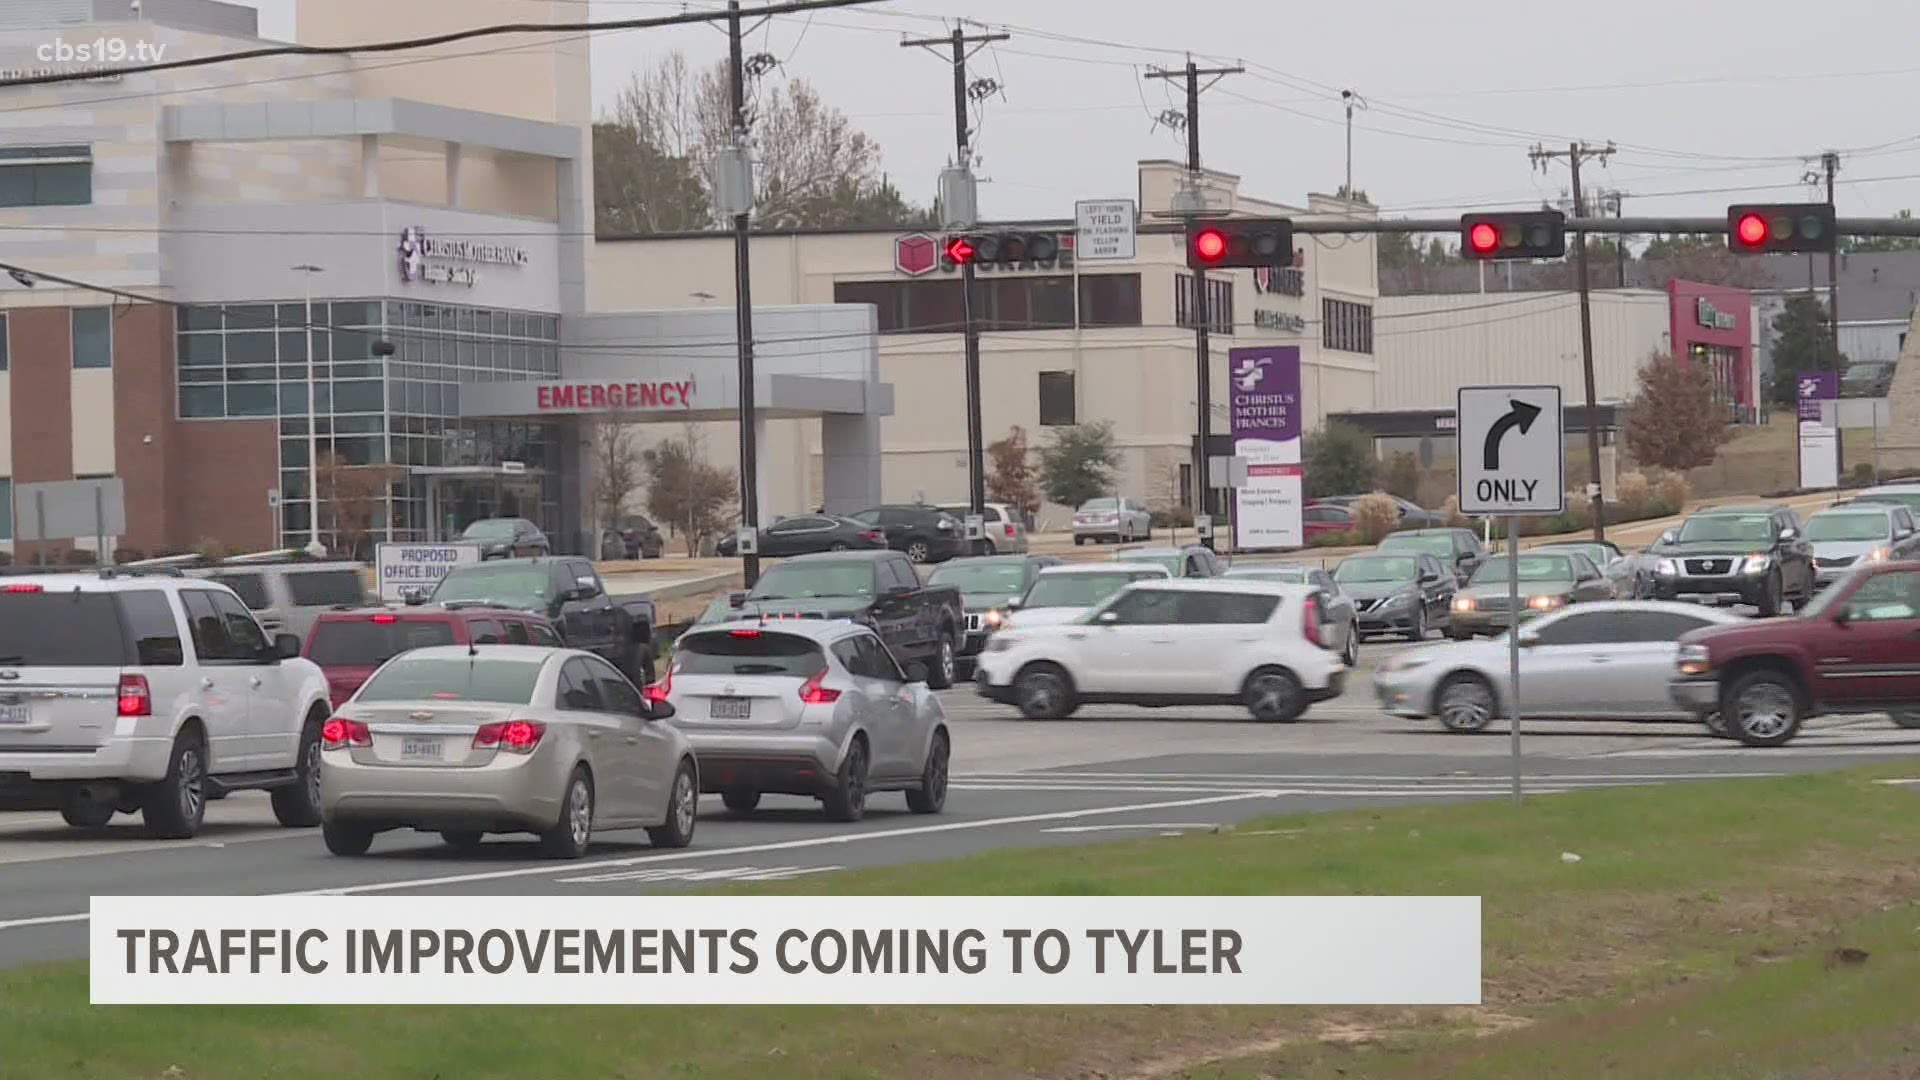 The City of Tyler will retime traffic signal lights at 18 intersections.